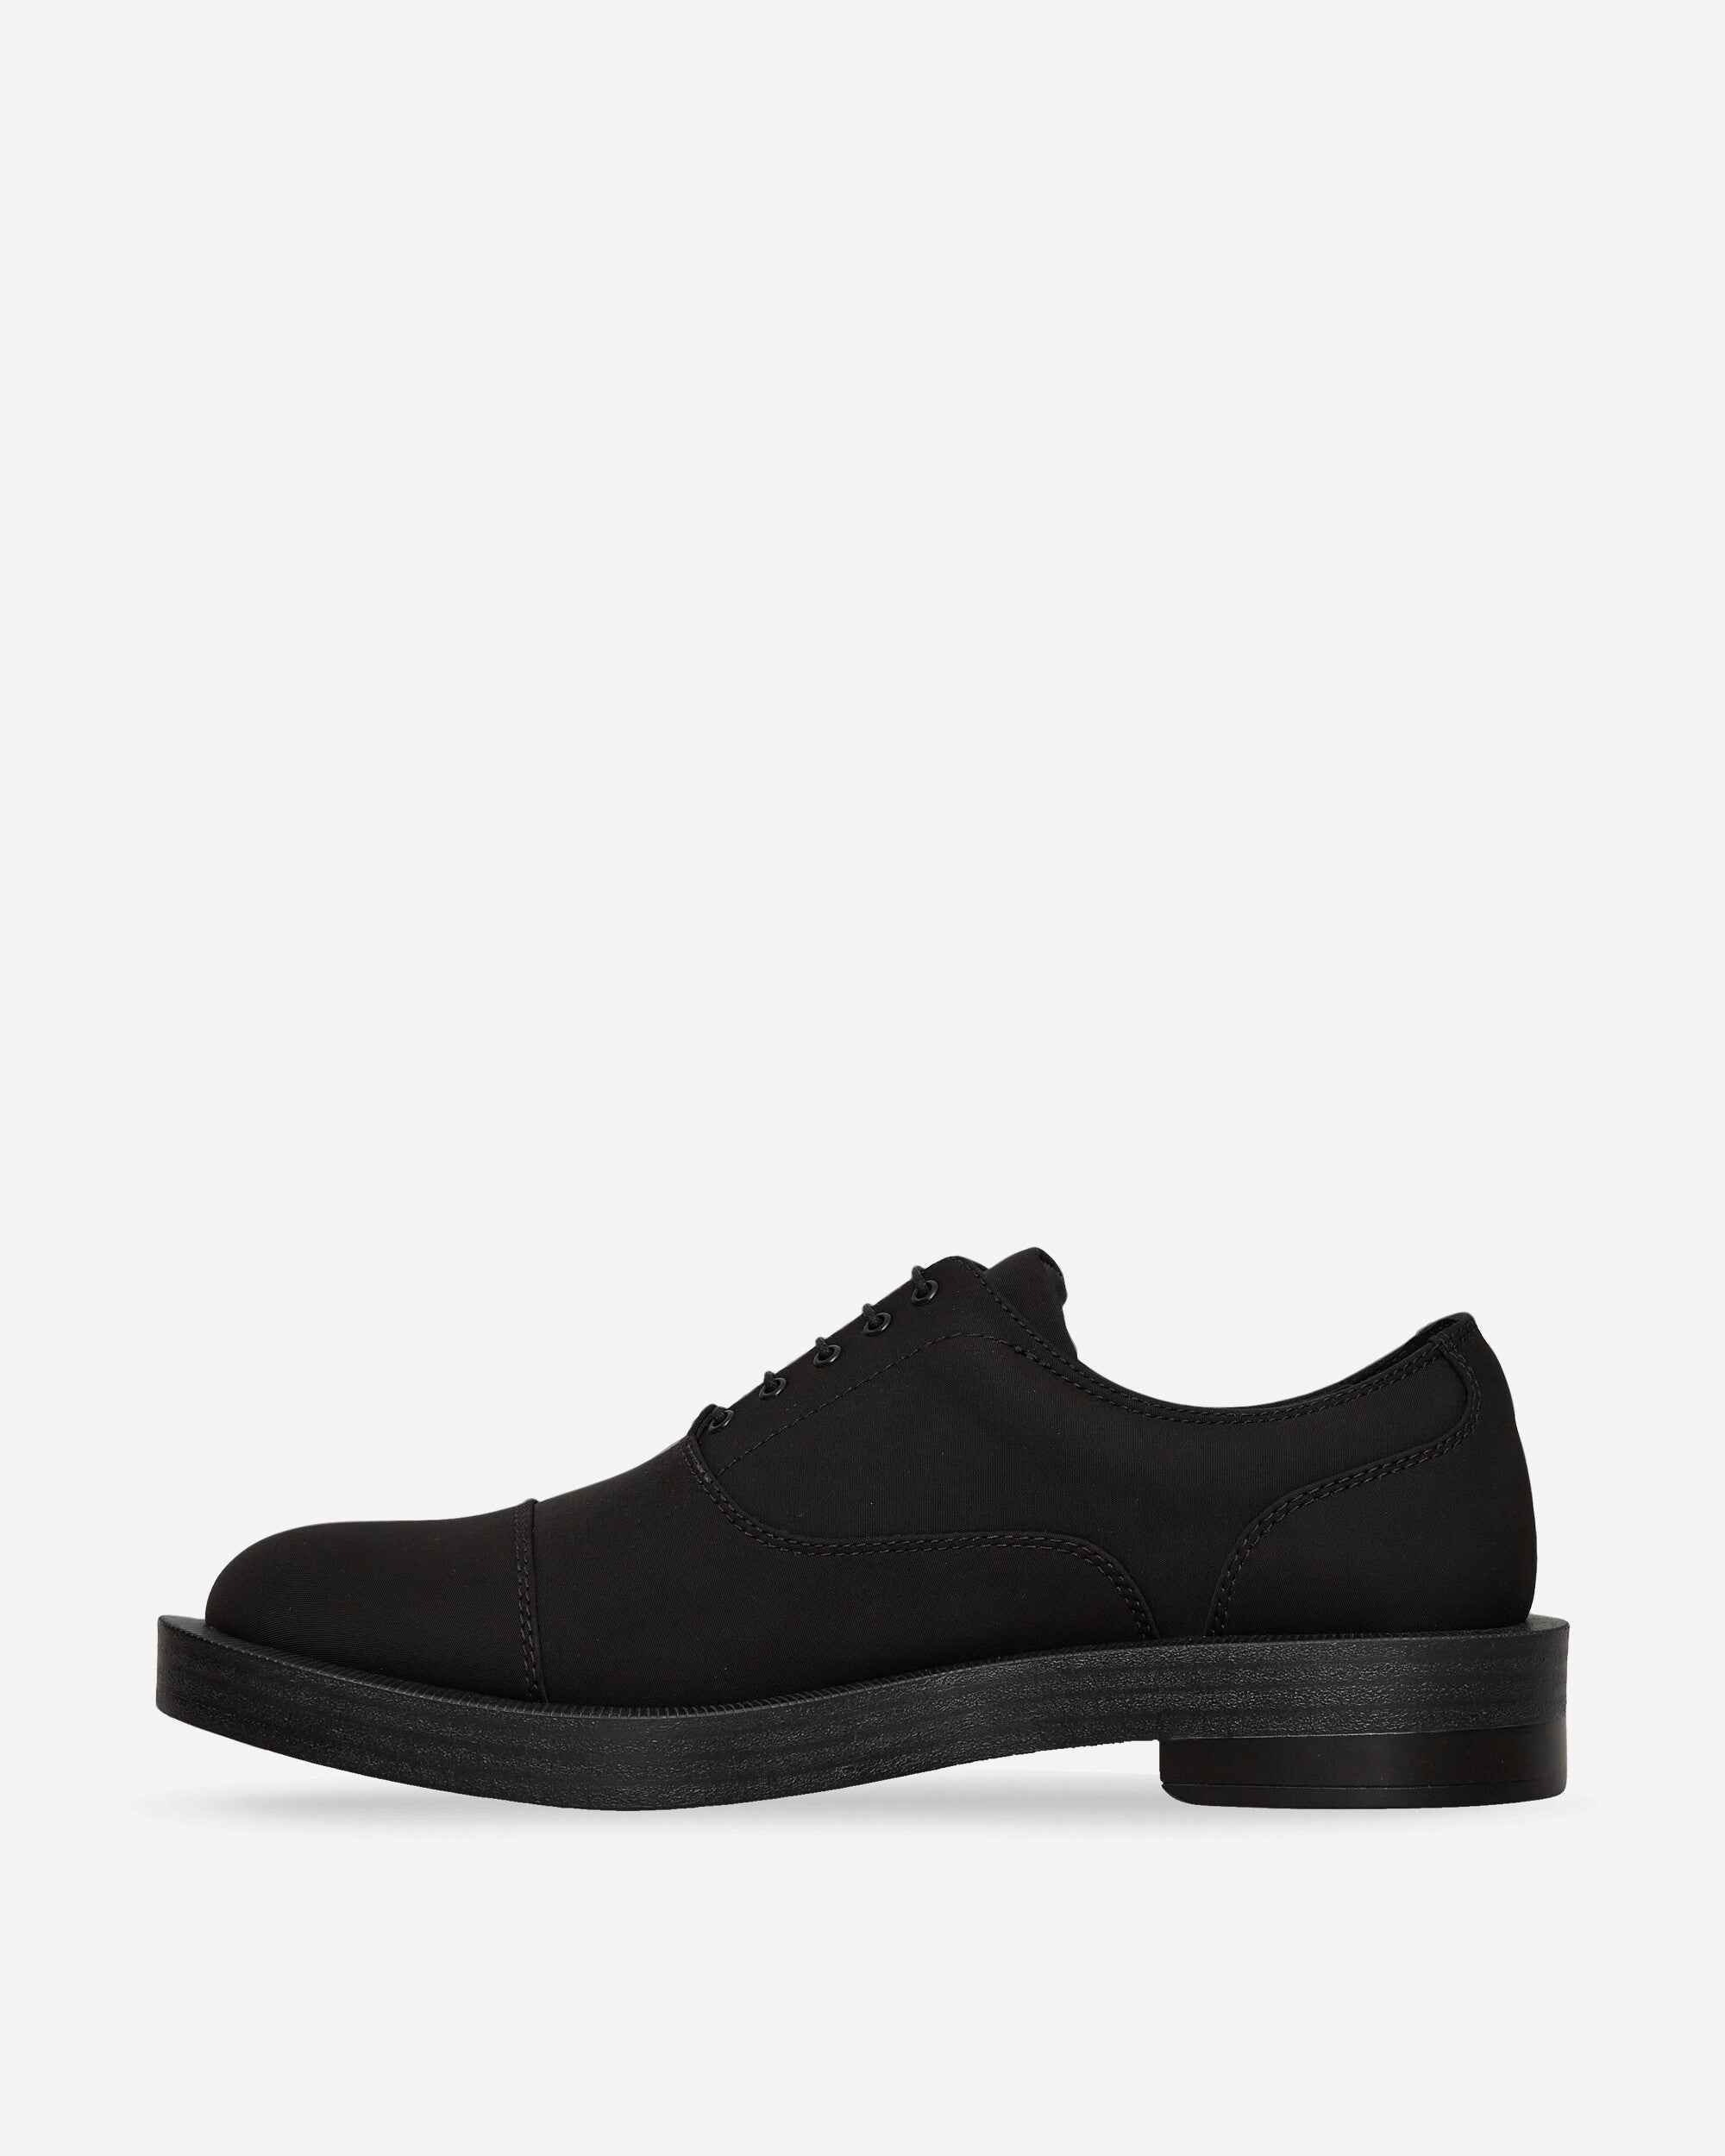 Clarks Woven Tier 1 Oxford Black Classic Shoes Oxford CUROXFORD2MW 001